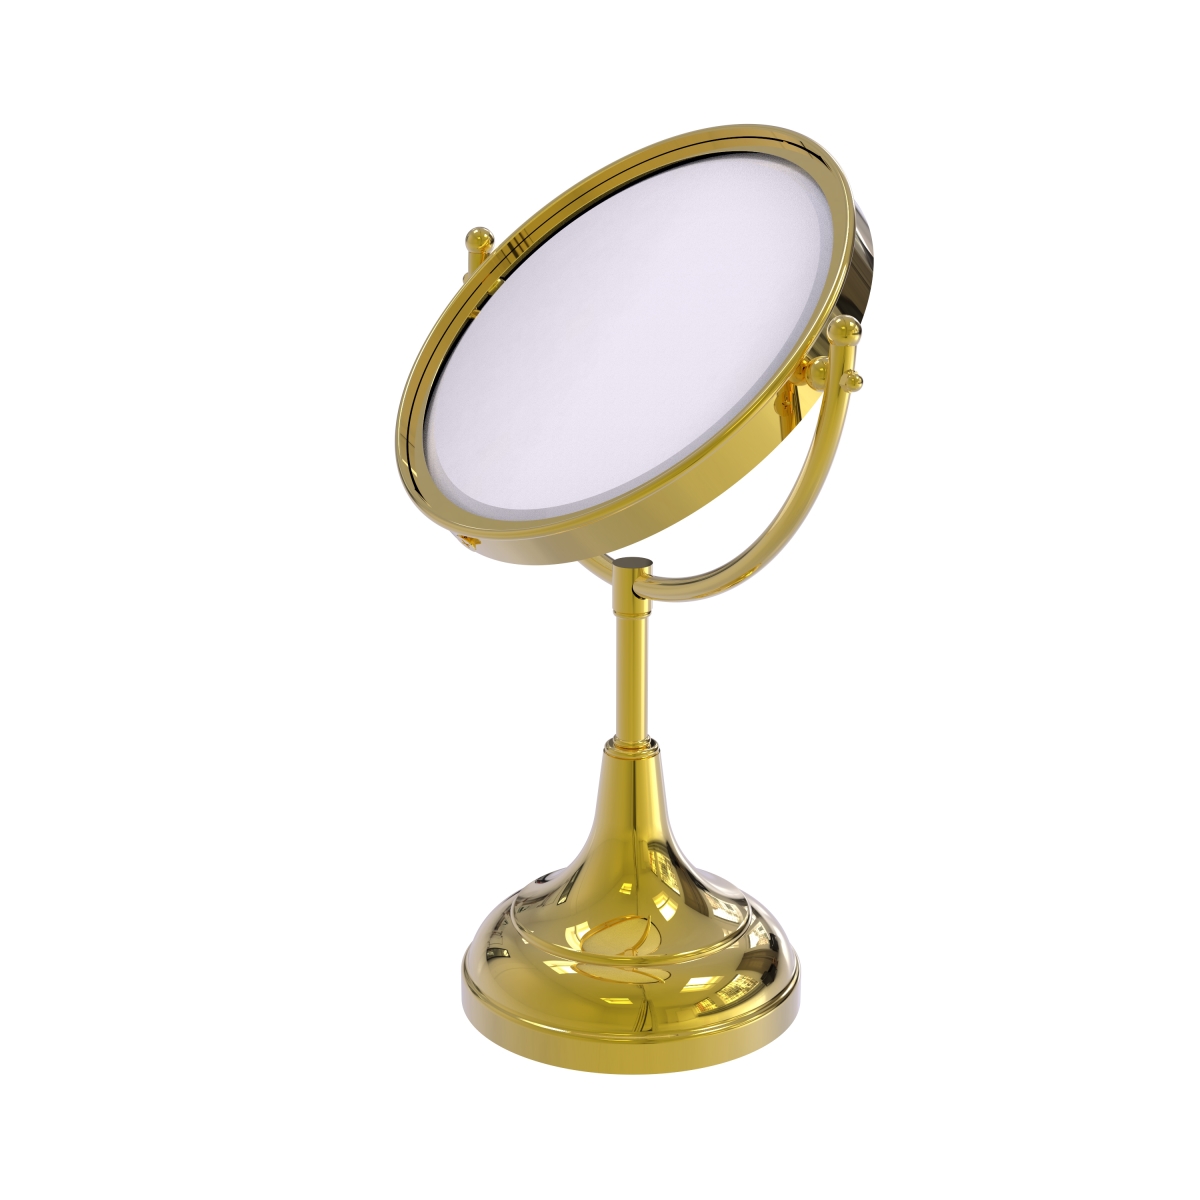 Dm-2-4x-unl Smooth Ring Style 8 In. Vanity Top Make-up Mirror 4x Magnification, Unlacquered Brass